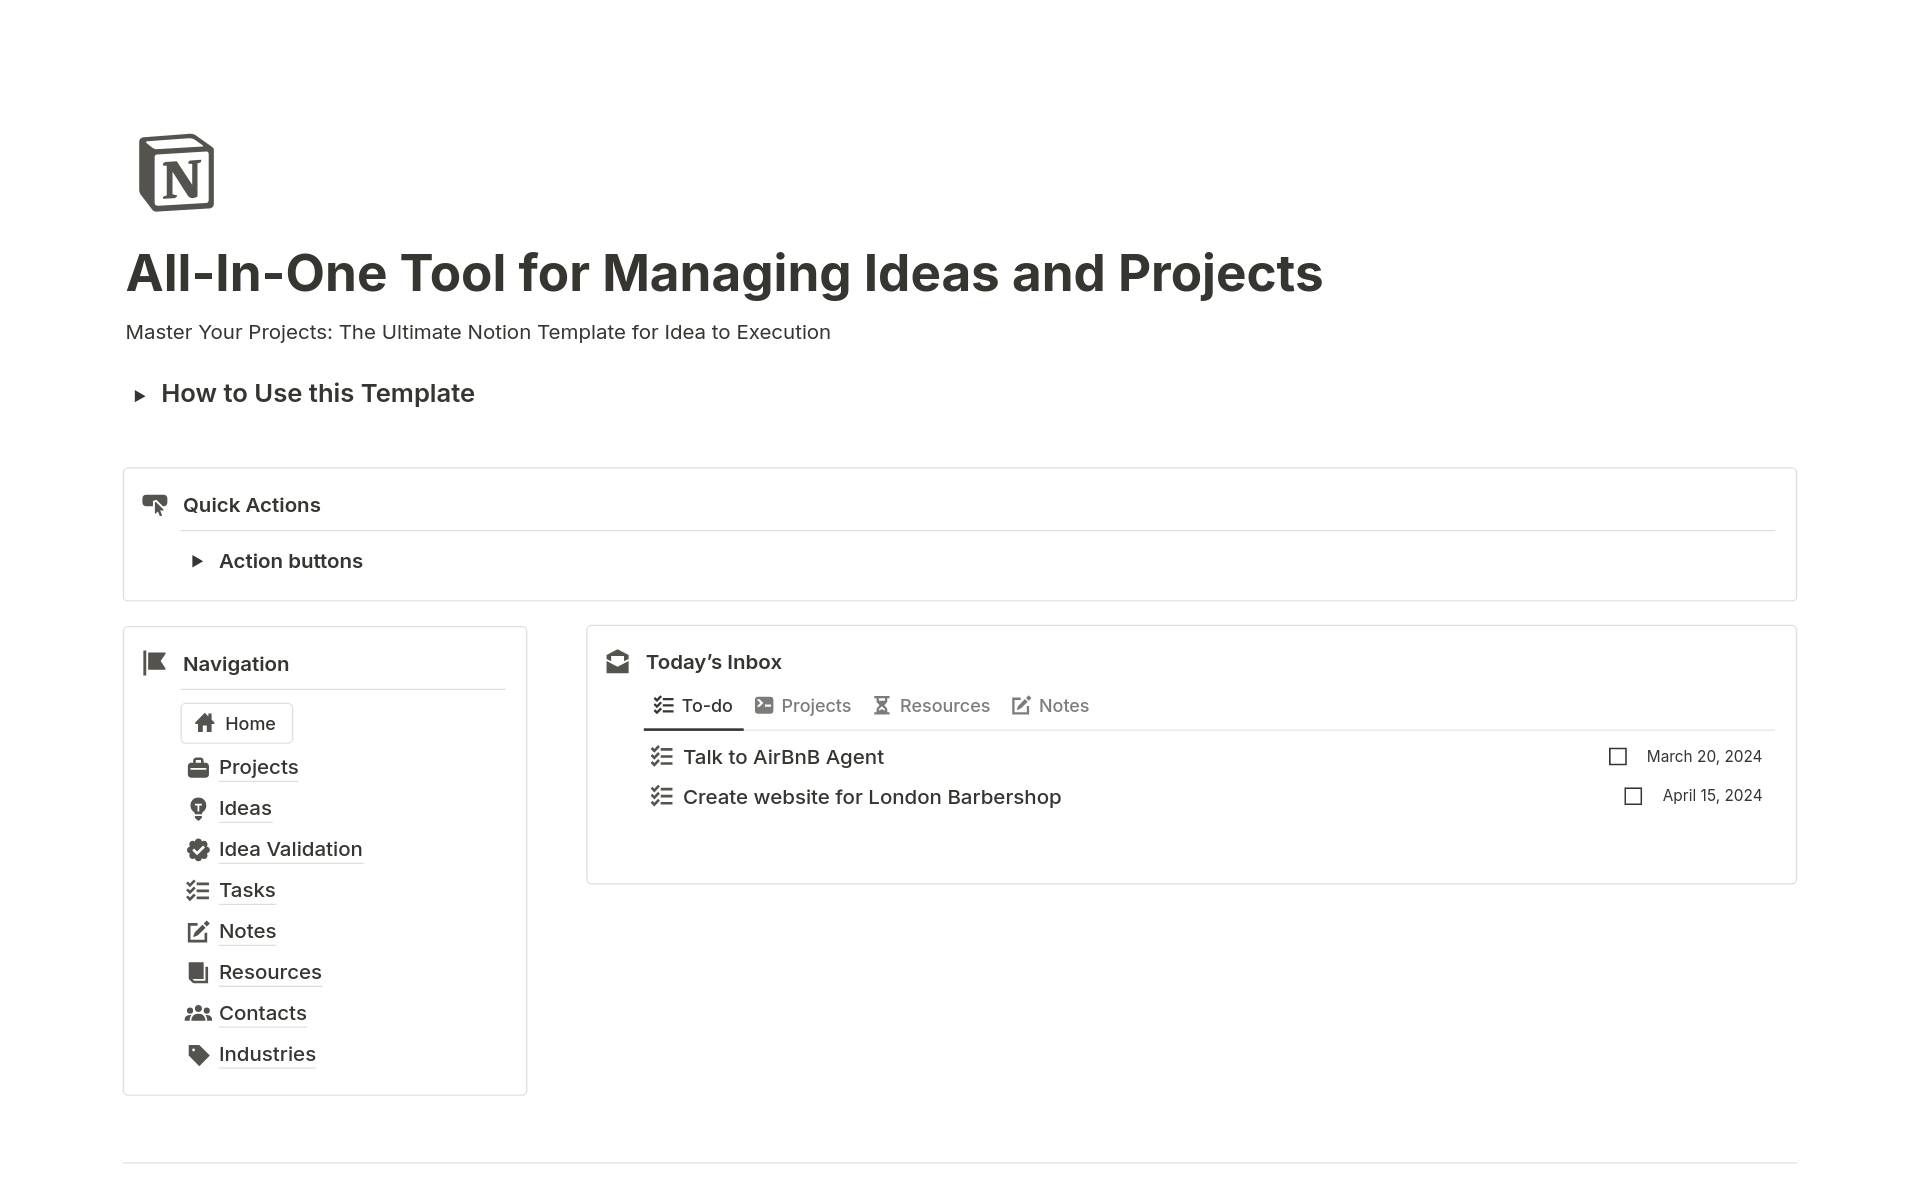 En forhåndsvisning av mal for All-In-One Tool for Managing Ideas and Projects